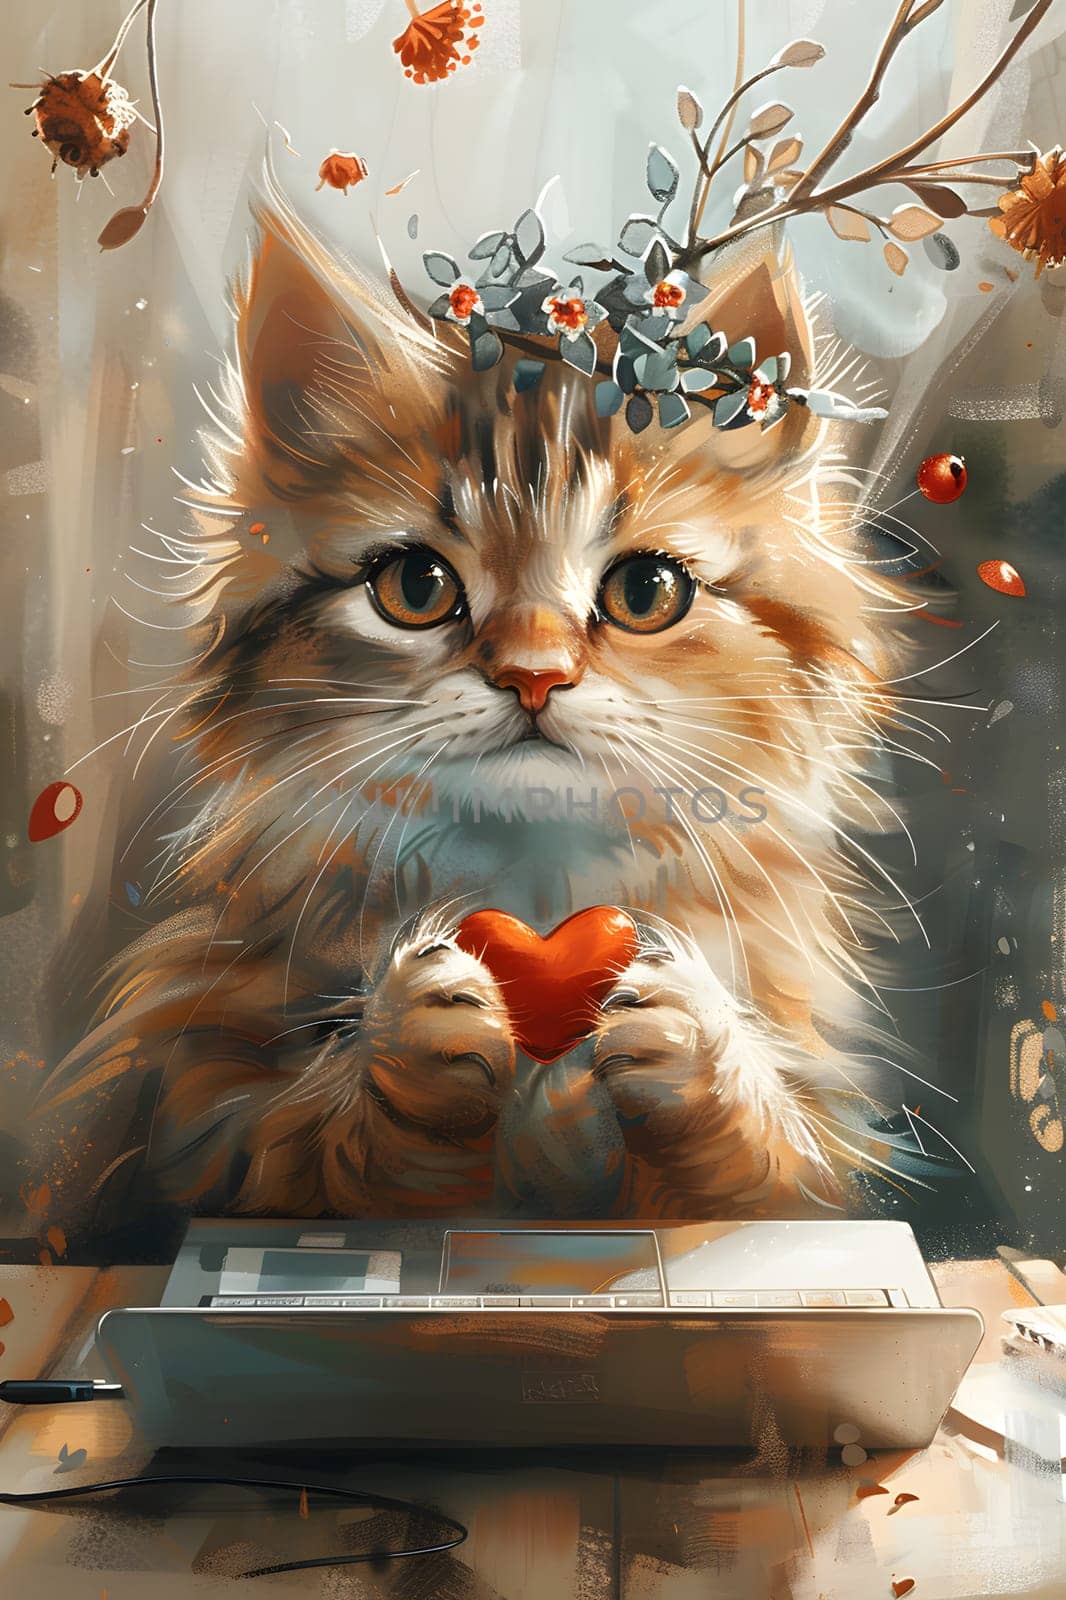 Felidae holding heart, adorned with flower crown, in a cute gesture by Nadtochiy